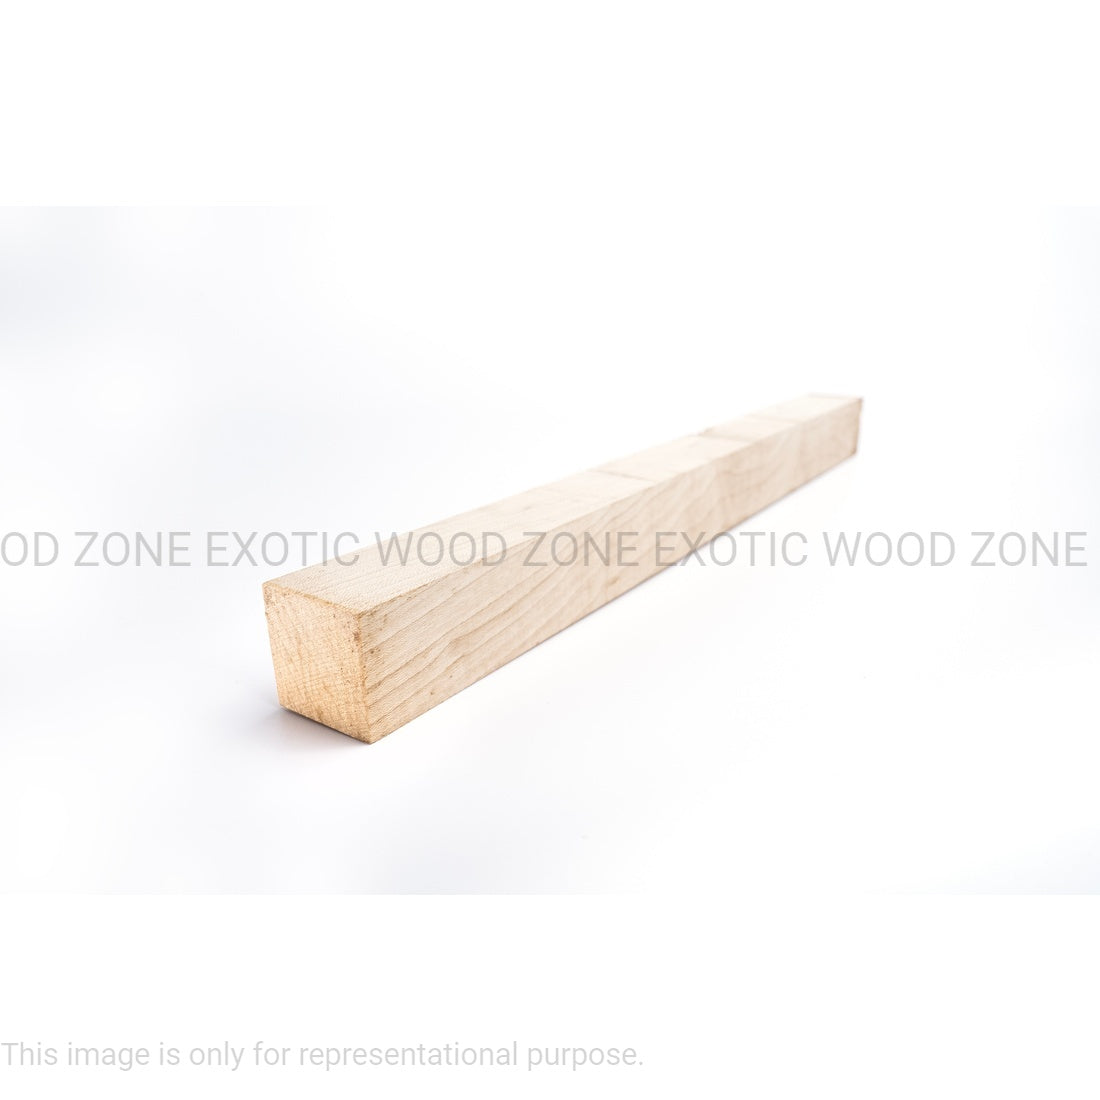 Hard Maple Hobbywood Blank 1&quot; x 1&quot; x 12&quot; inches Exotic Wood Zone